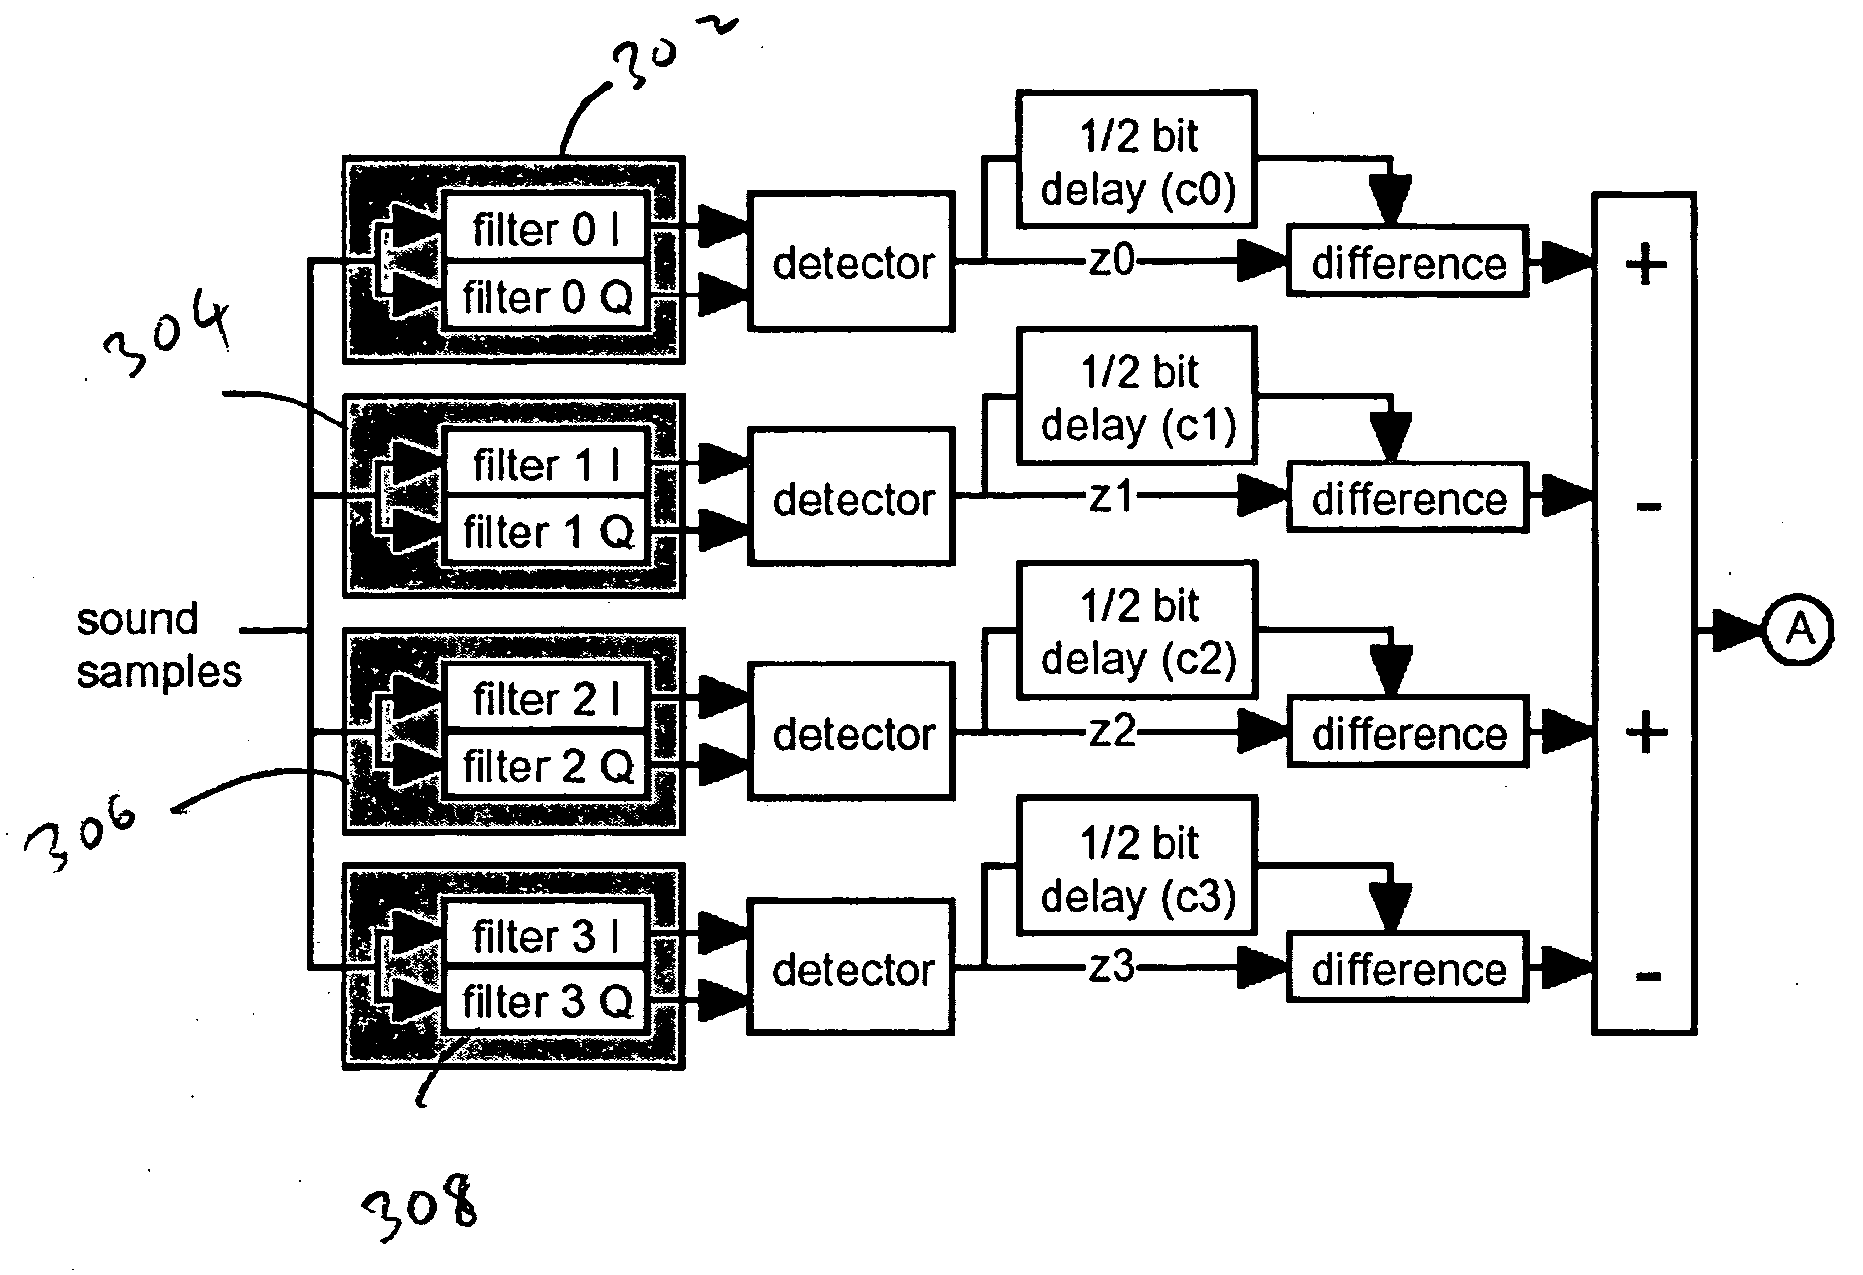 System and method for encoding and decoding digital data using acoustical tones